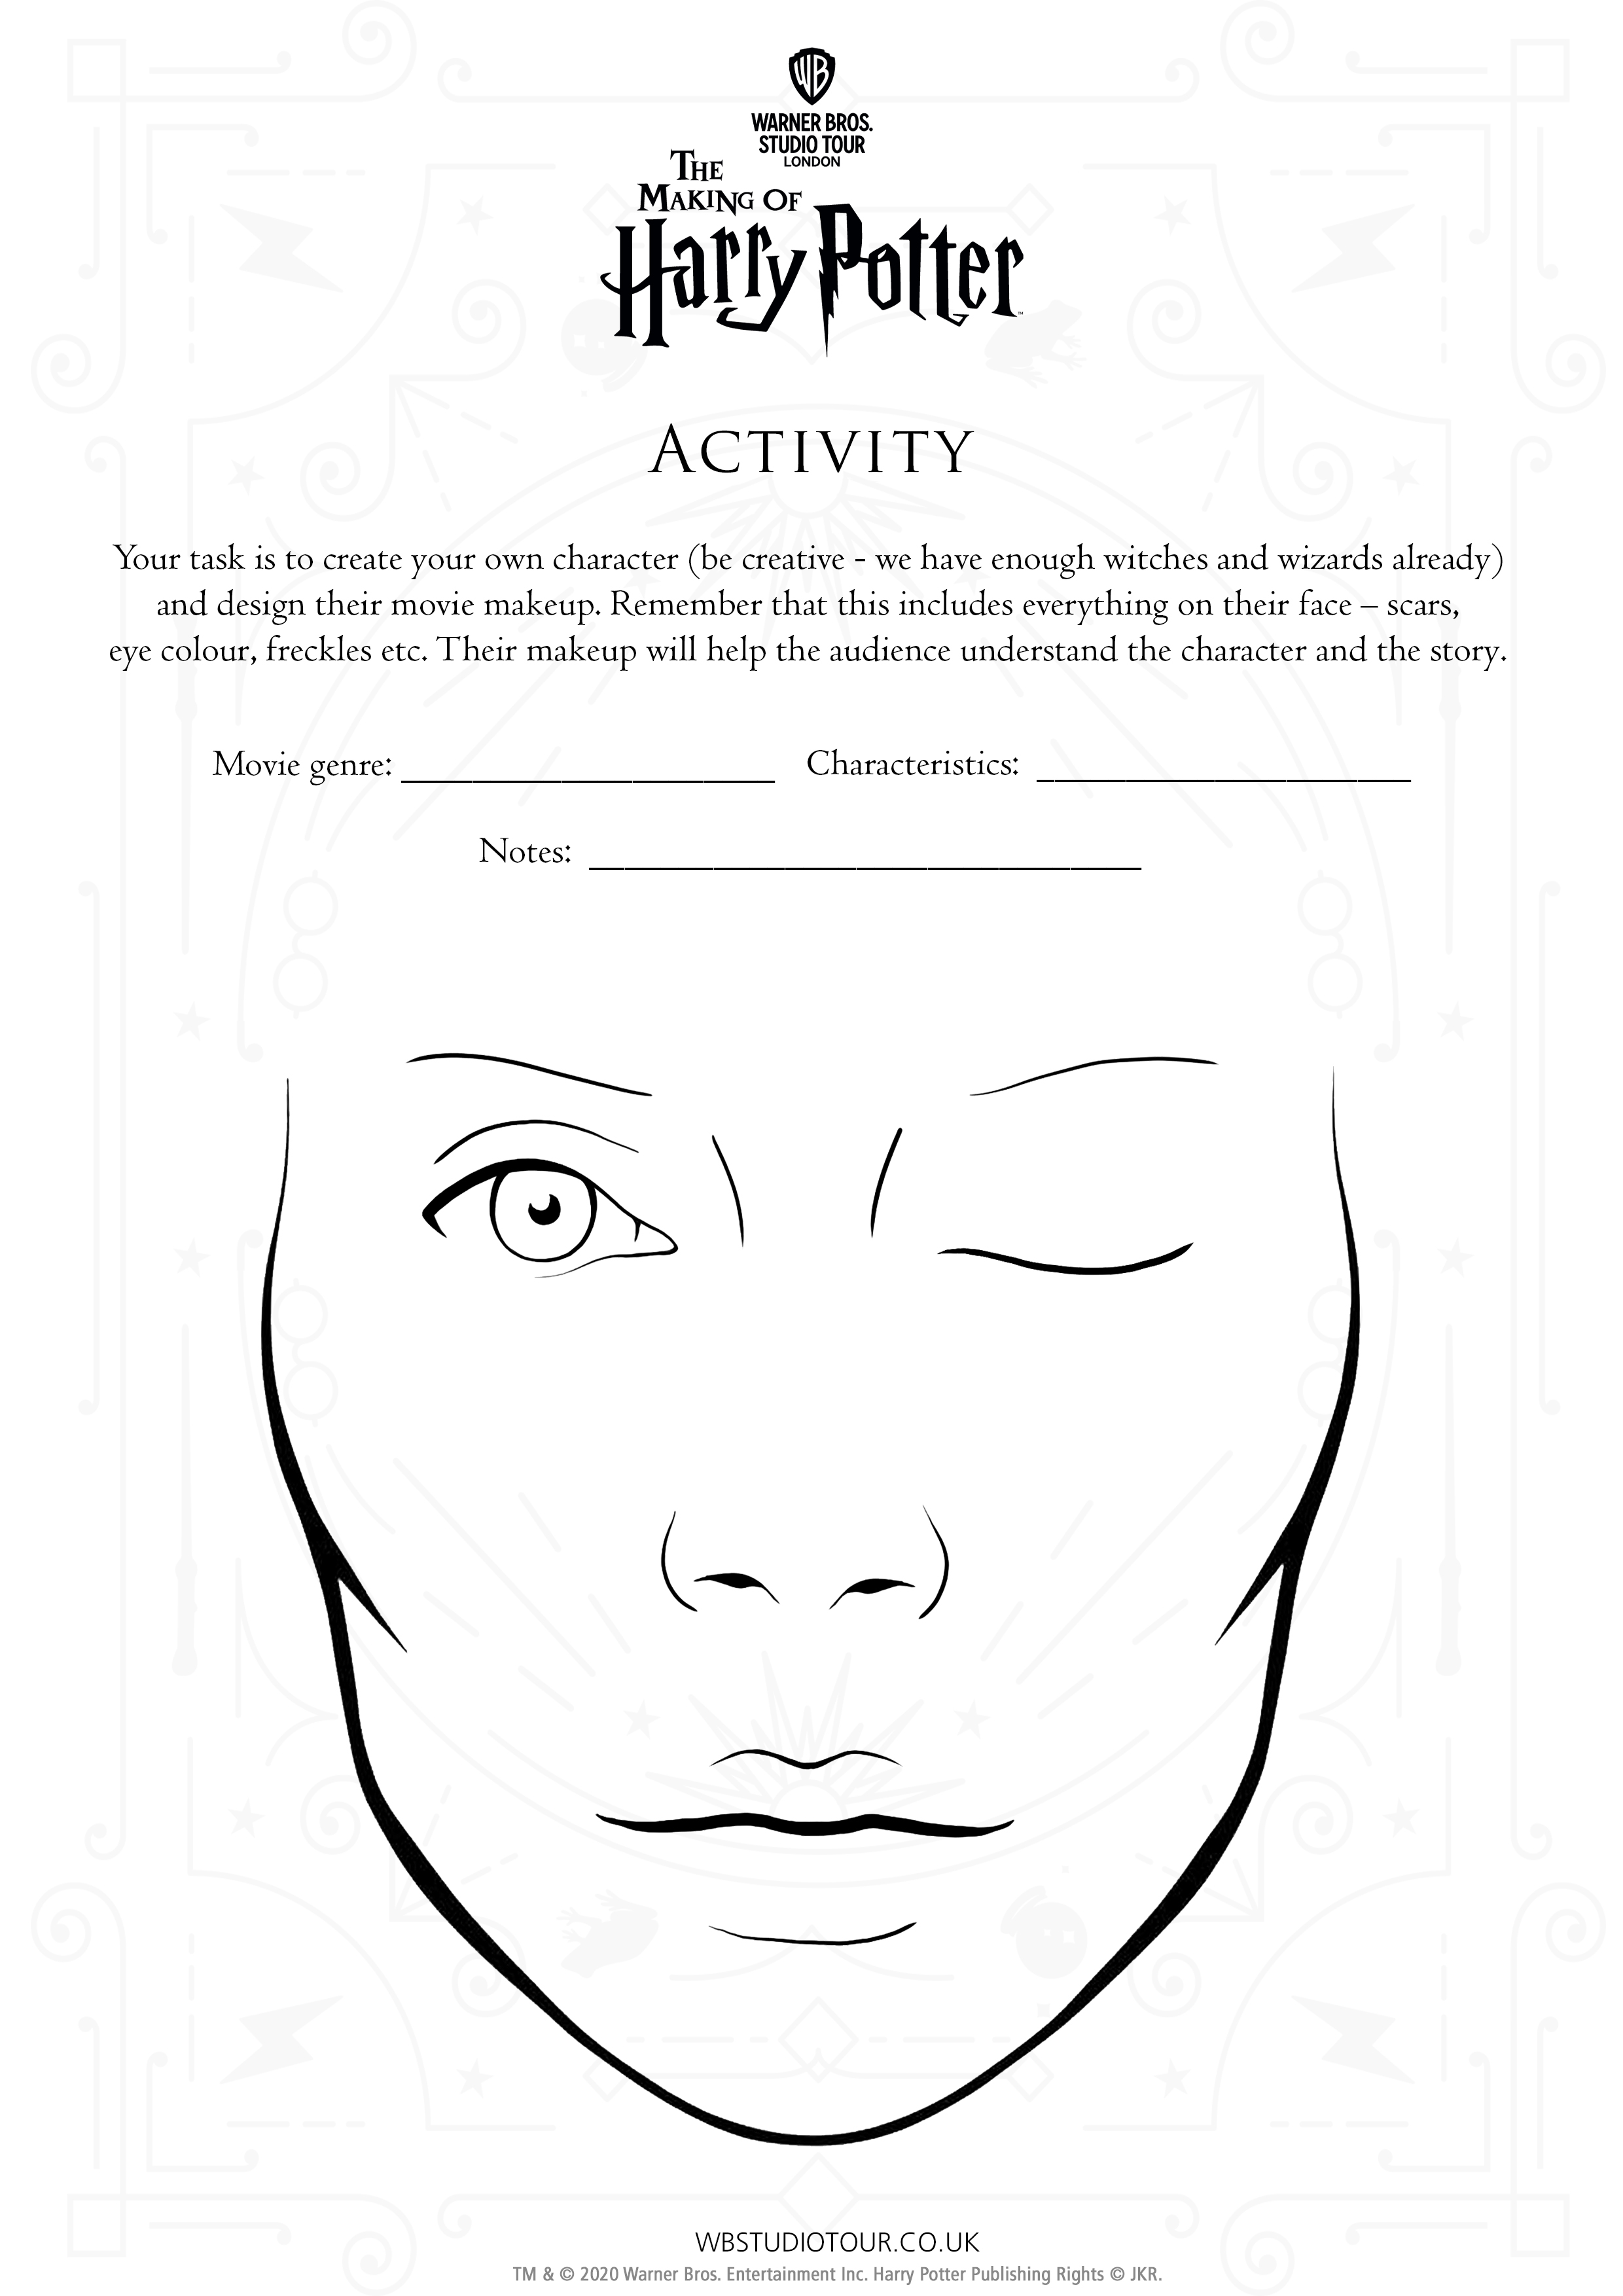 Movie Makeup activity worksheets page 2 - Studio Tour at Home